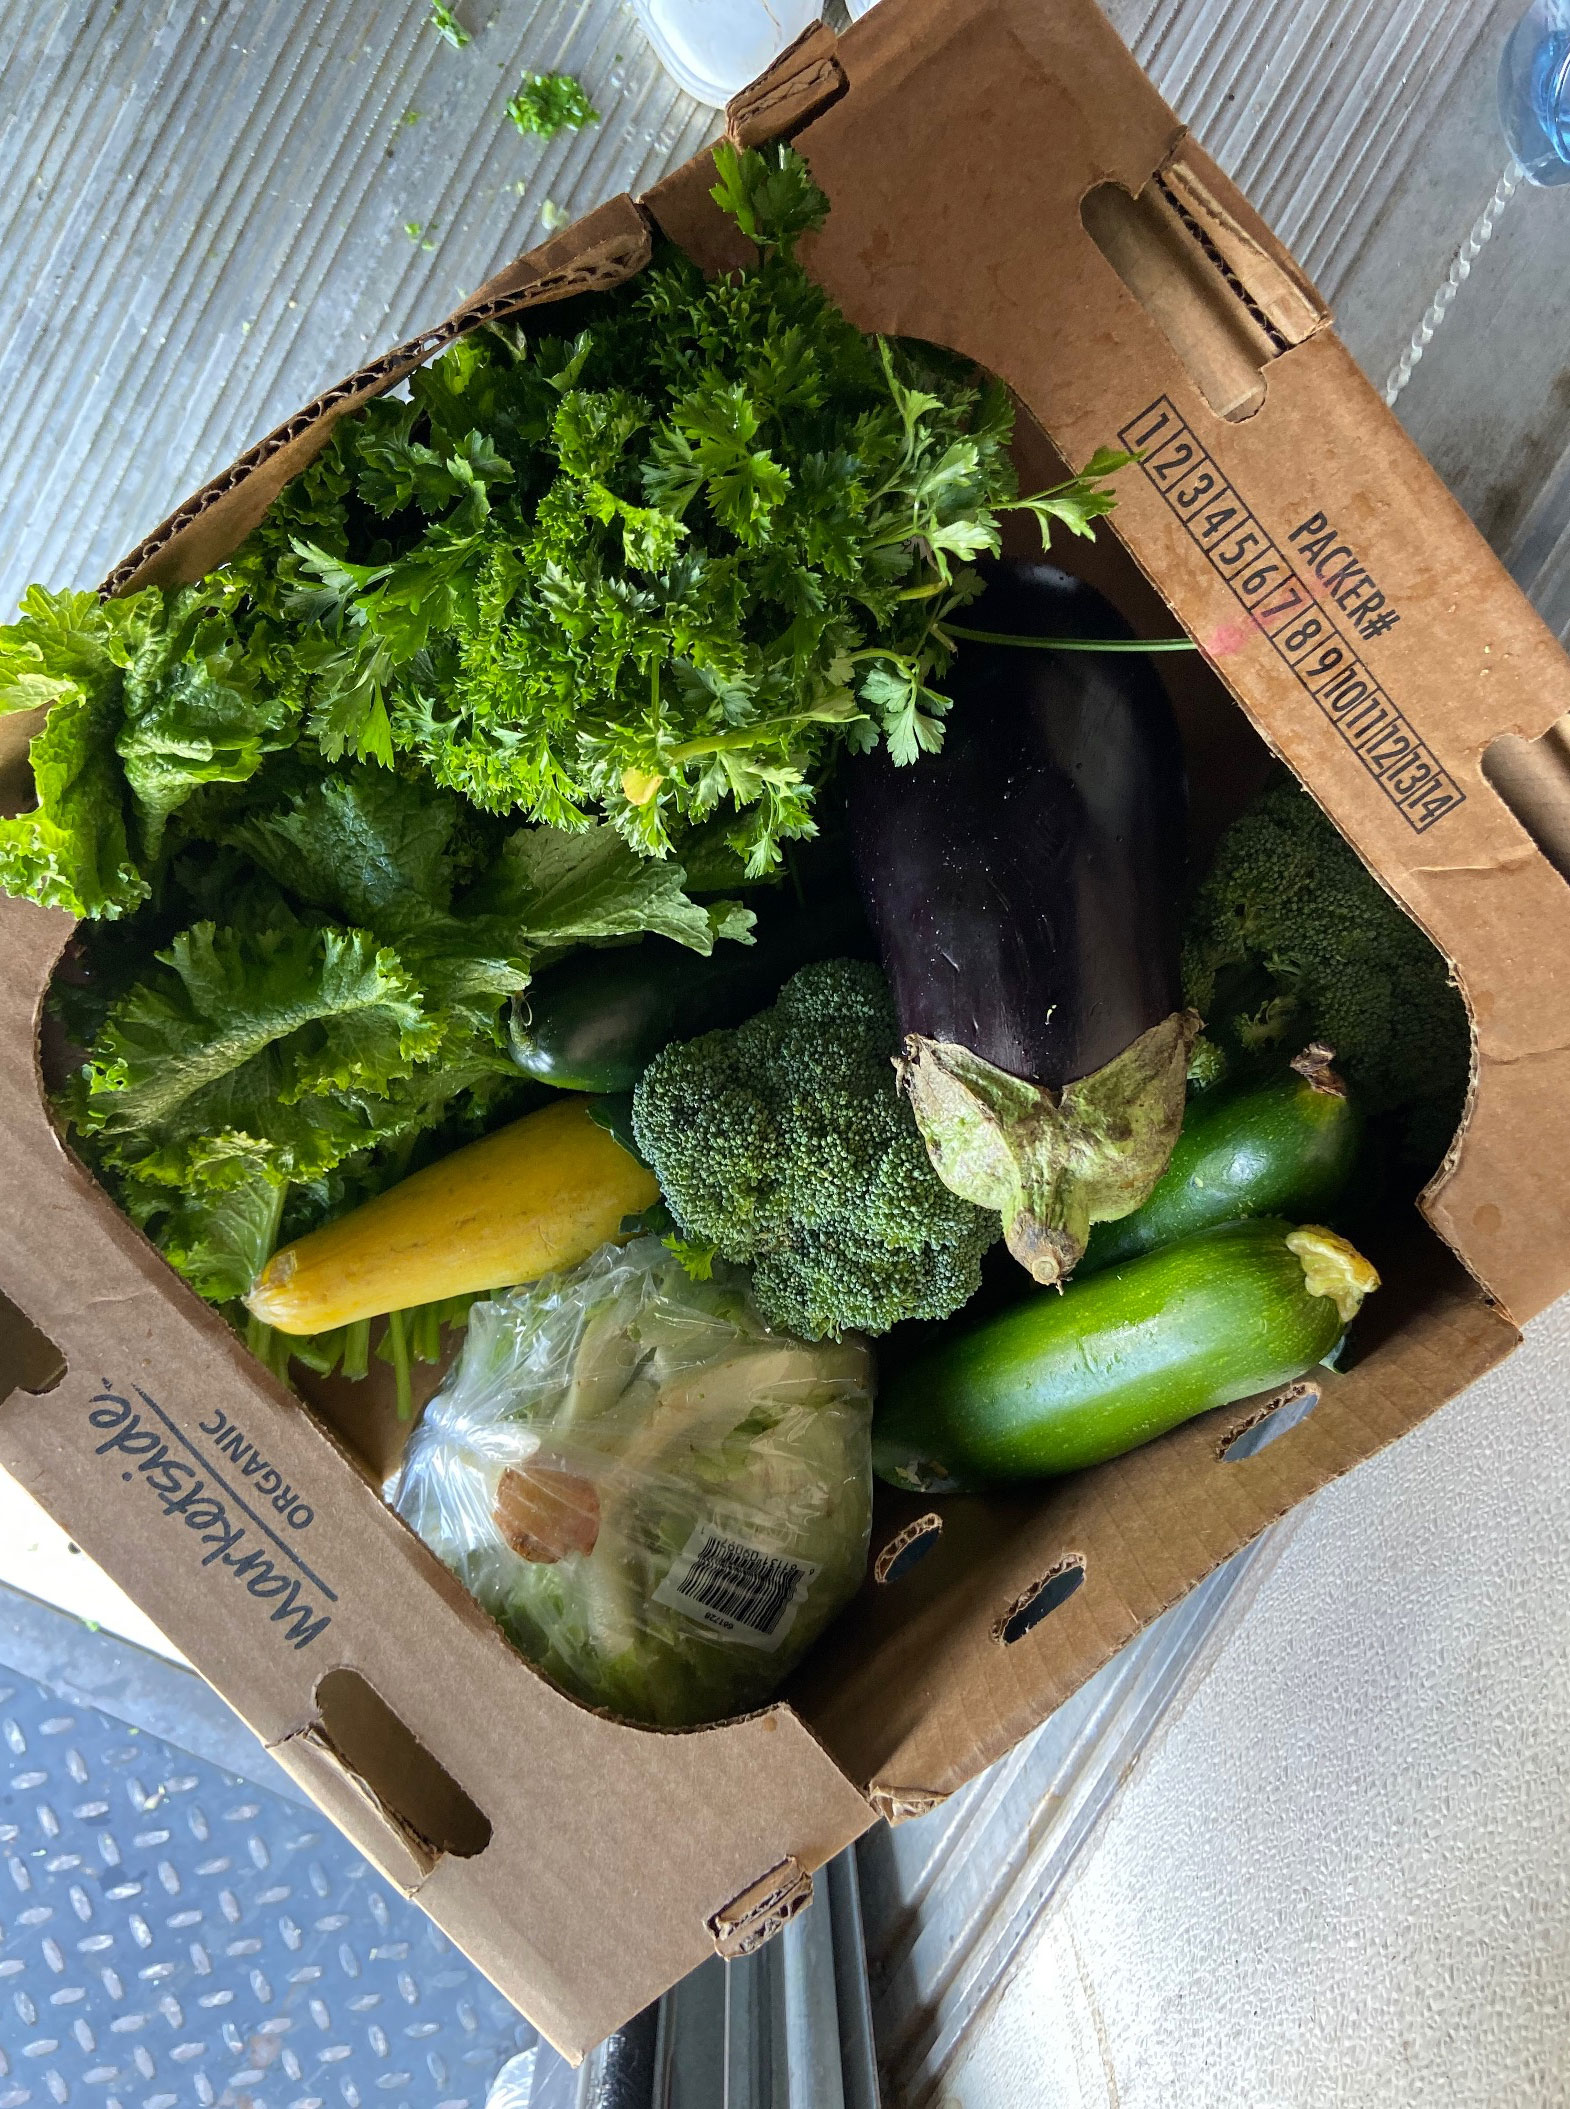 produce in a box